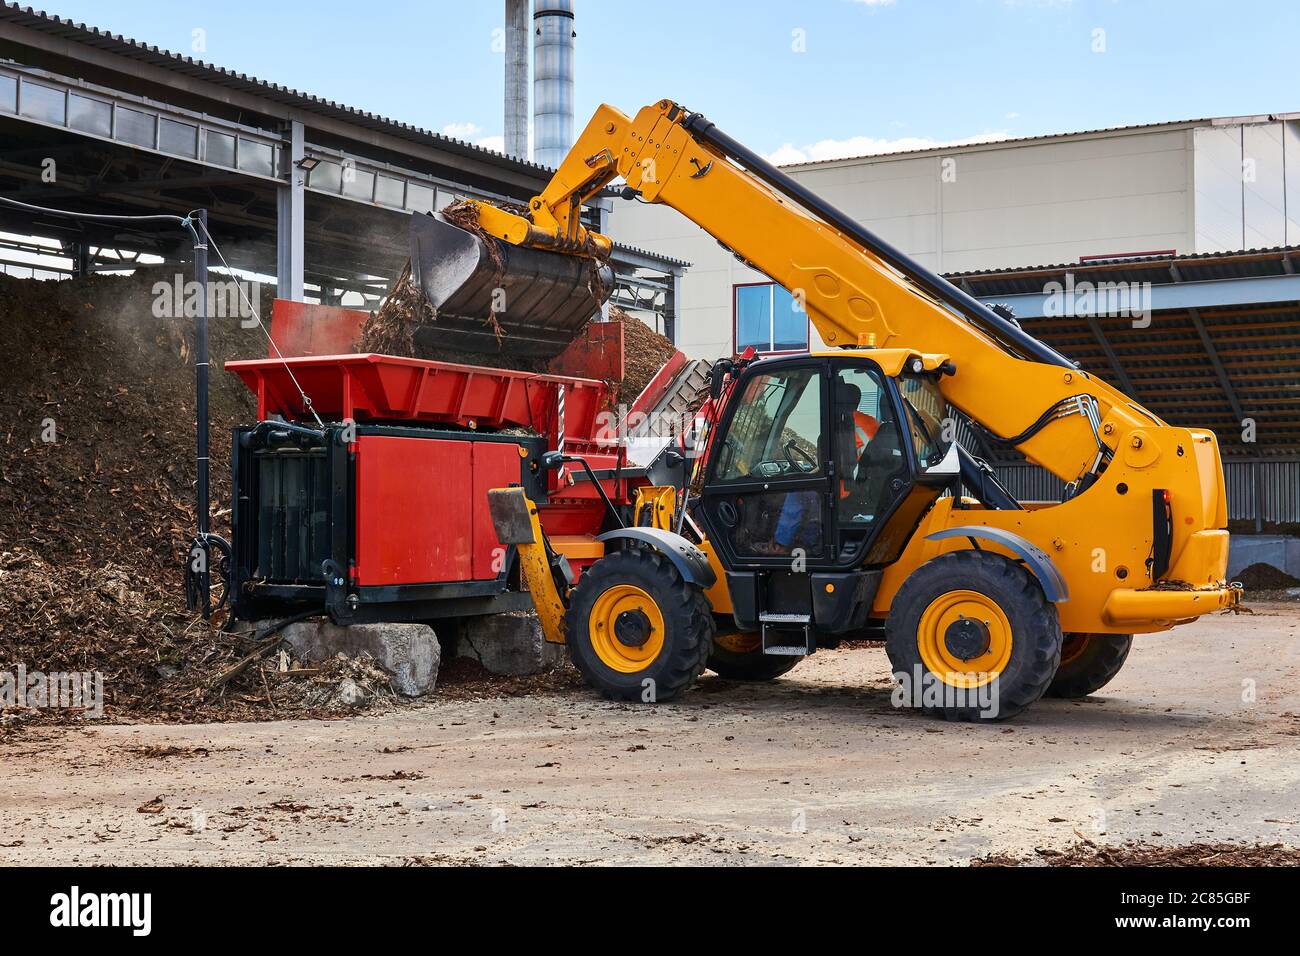 bucket loader loads wood bark into an industrial tree chipper in a woodworking industry Stock Photo